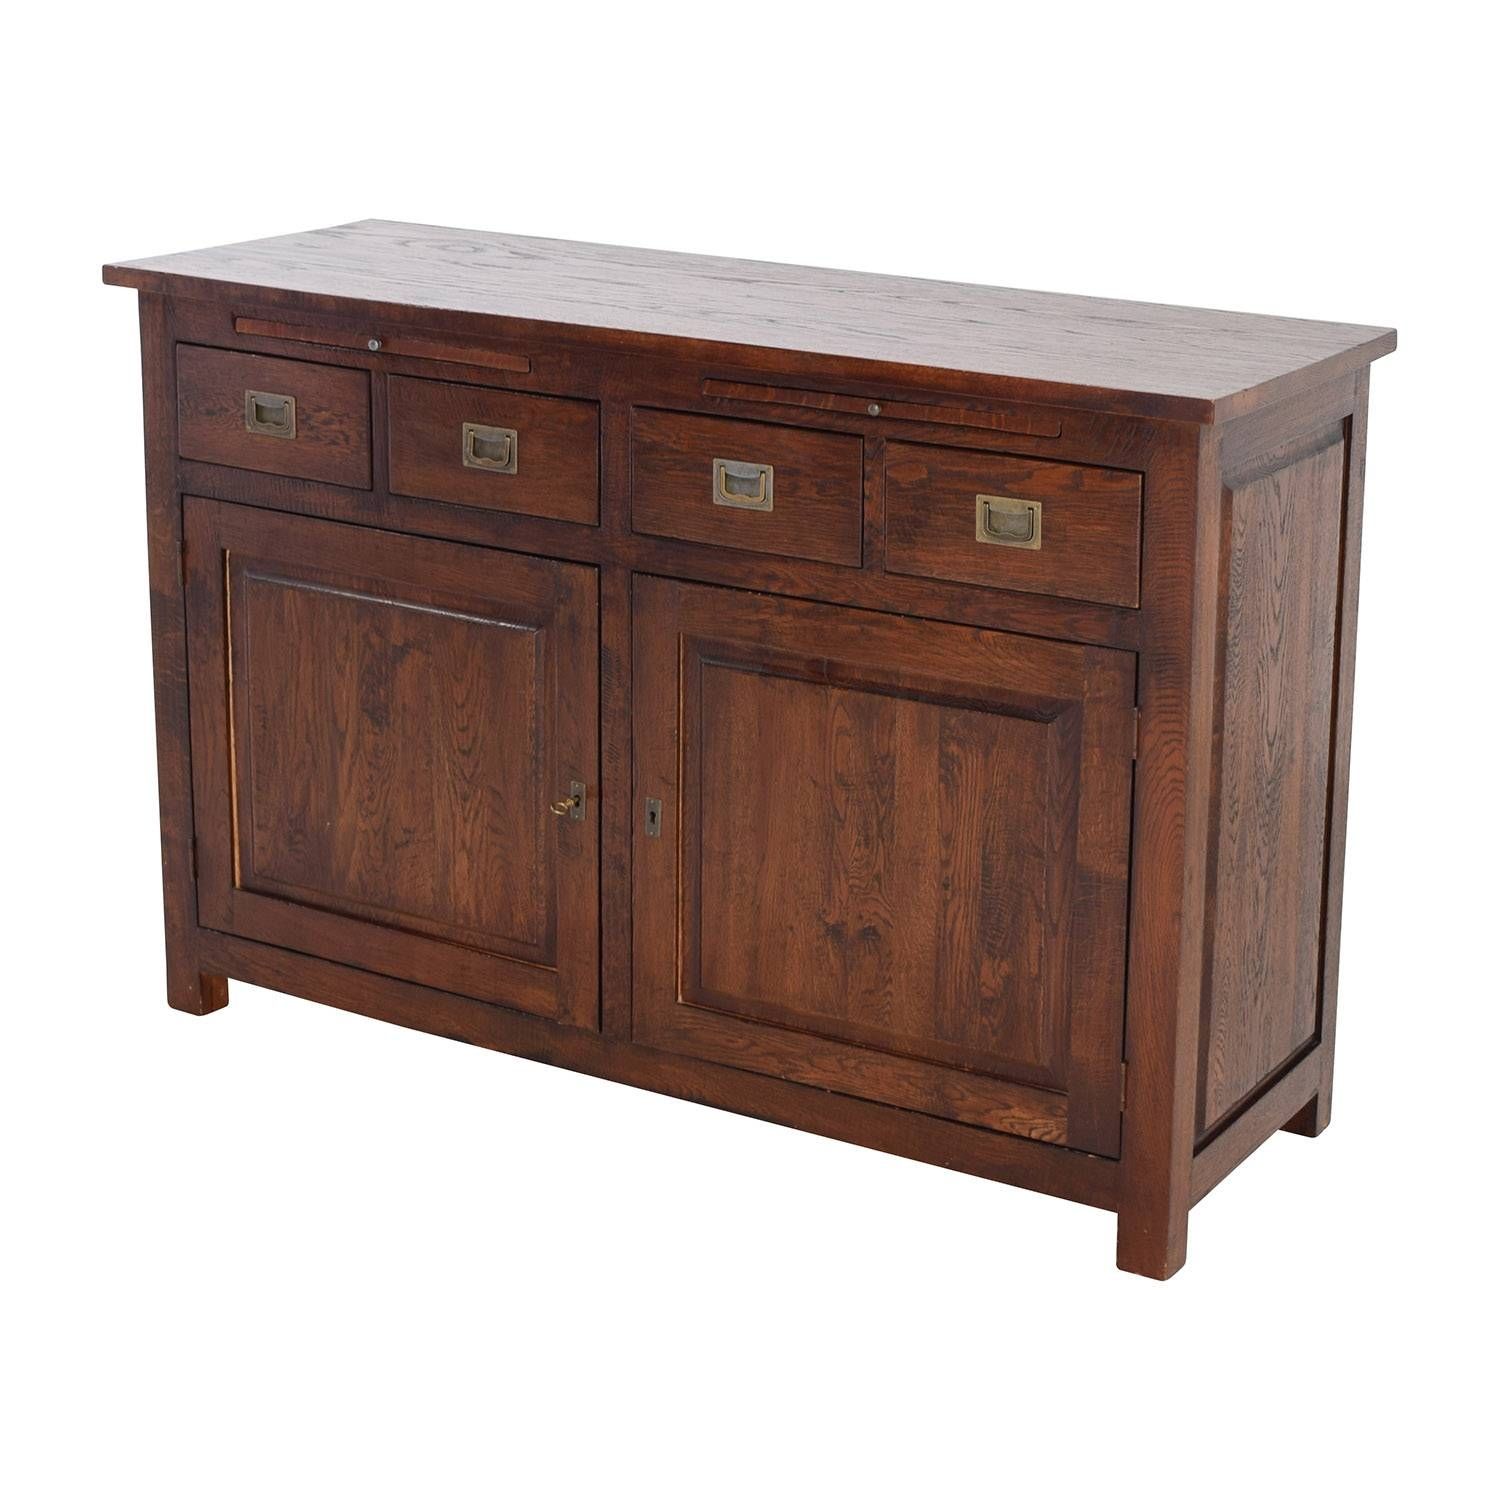 67% Off – Crate And Barrel Crate & Barrel Bordeaux Buffet Throughout Latest Crate And Barrel Sideboards (View 5 of 15)